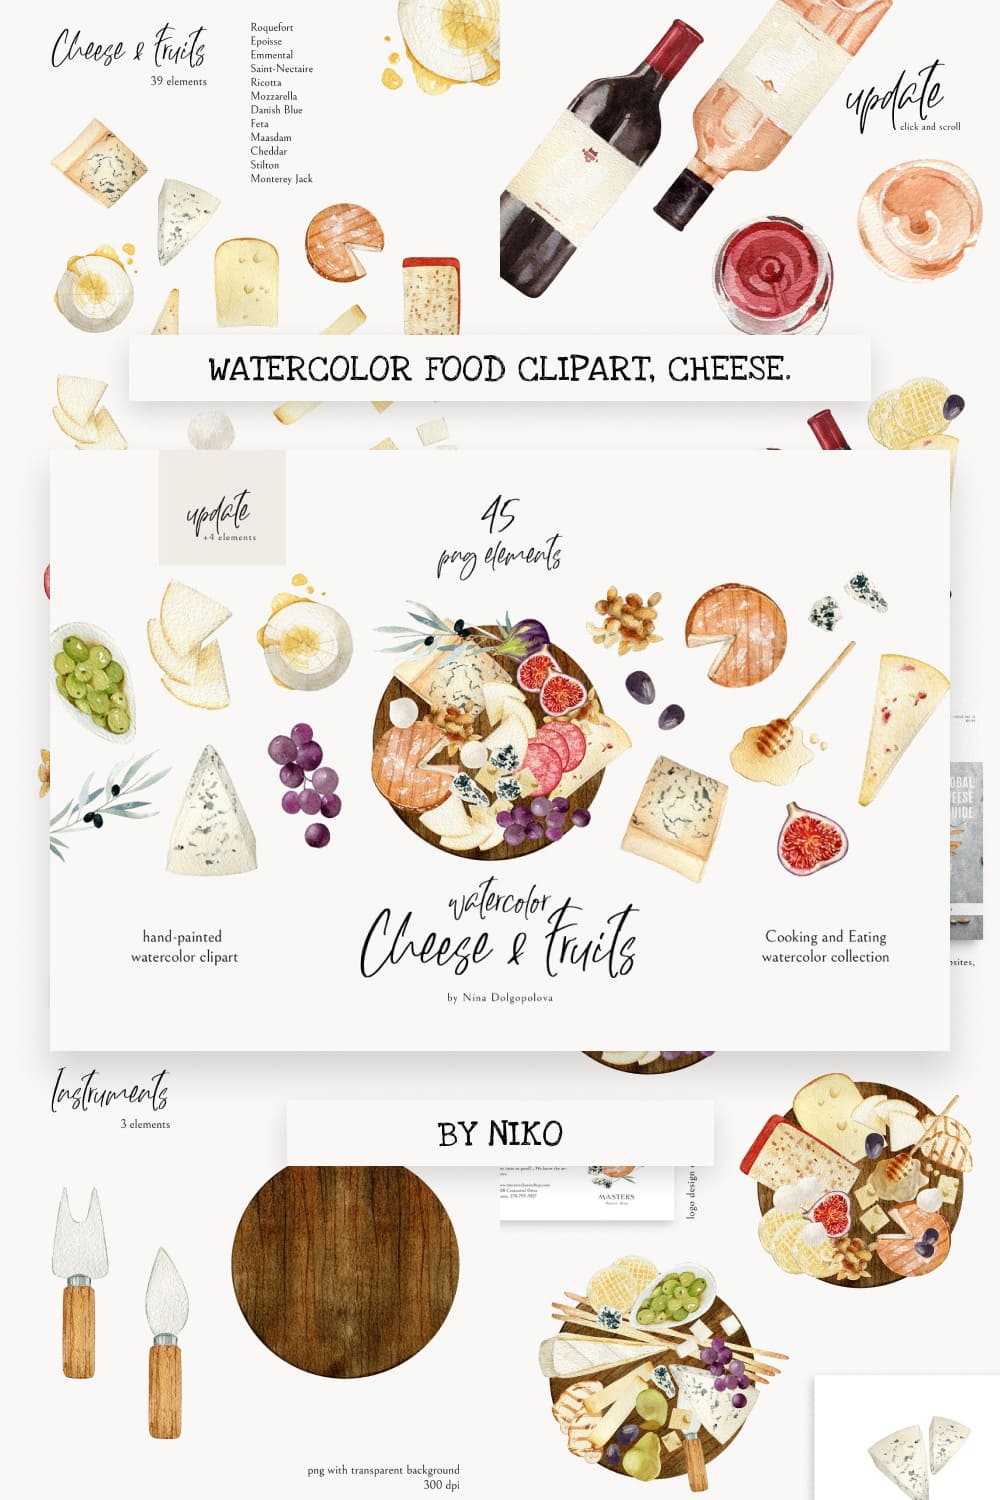 Watercolor food clipart cheese Pinterest.